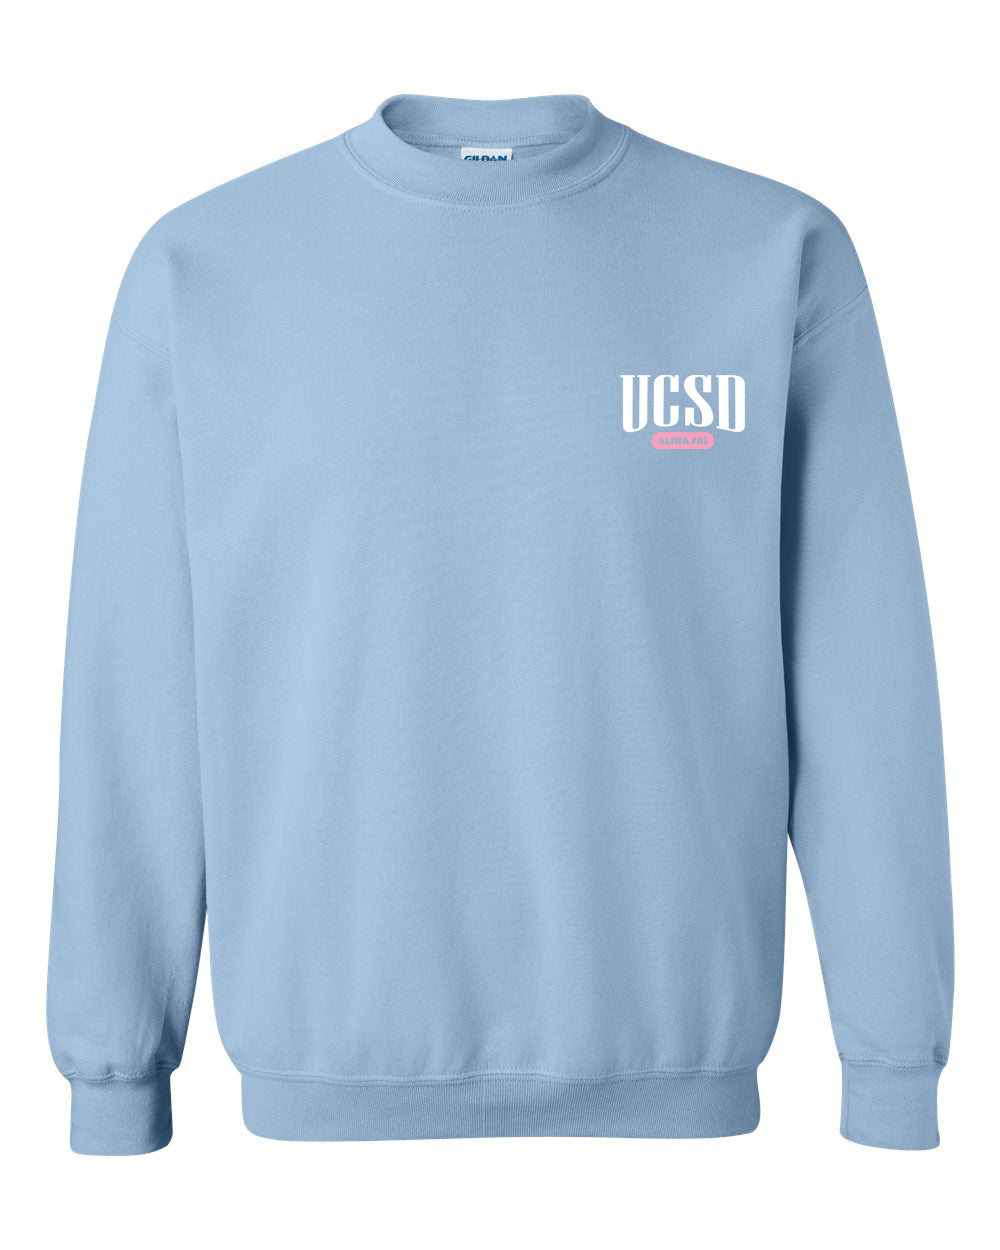 a light blue sweatshirt with the words usssd printed on it